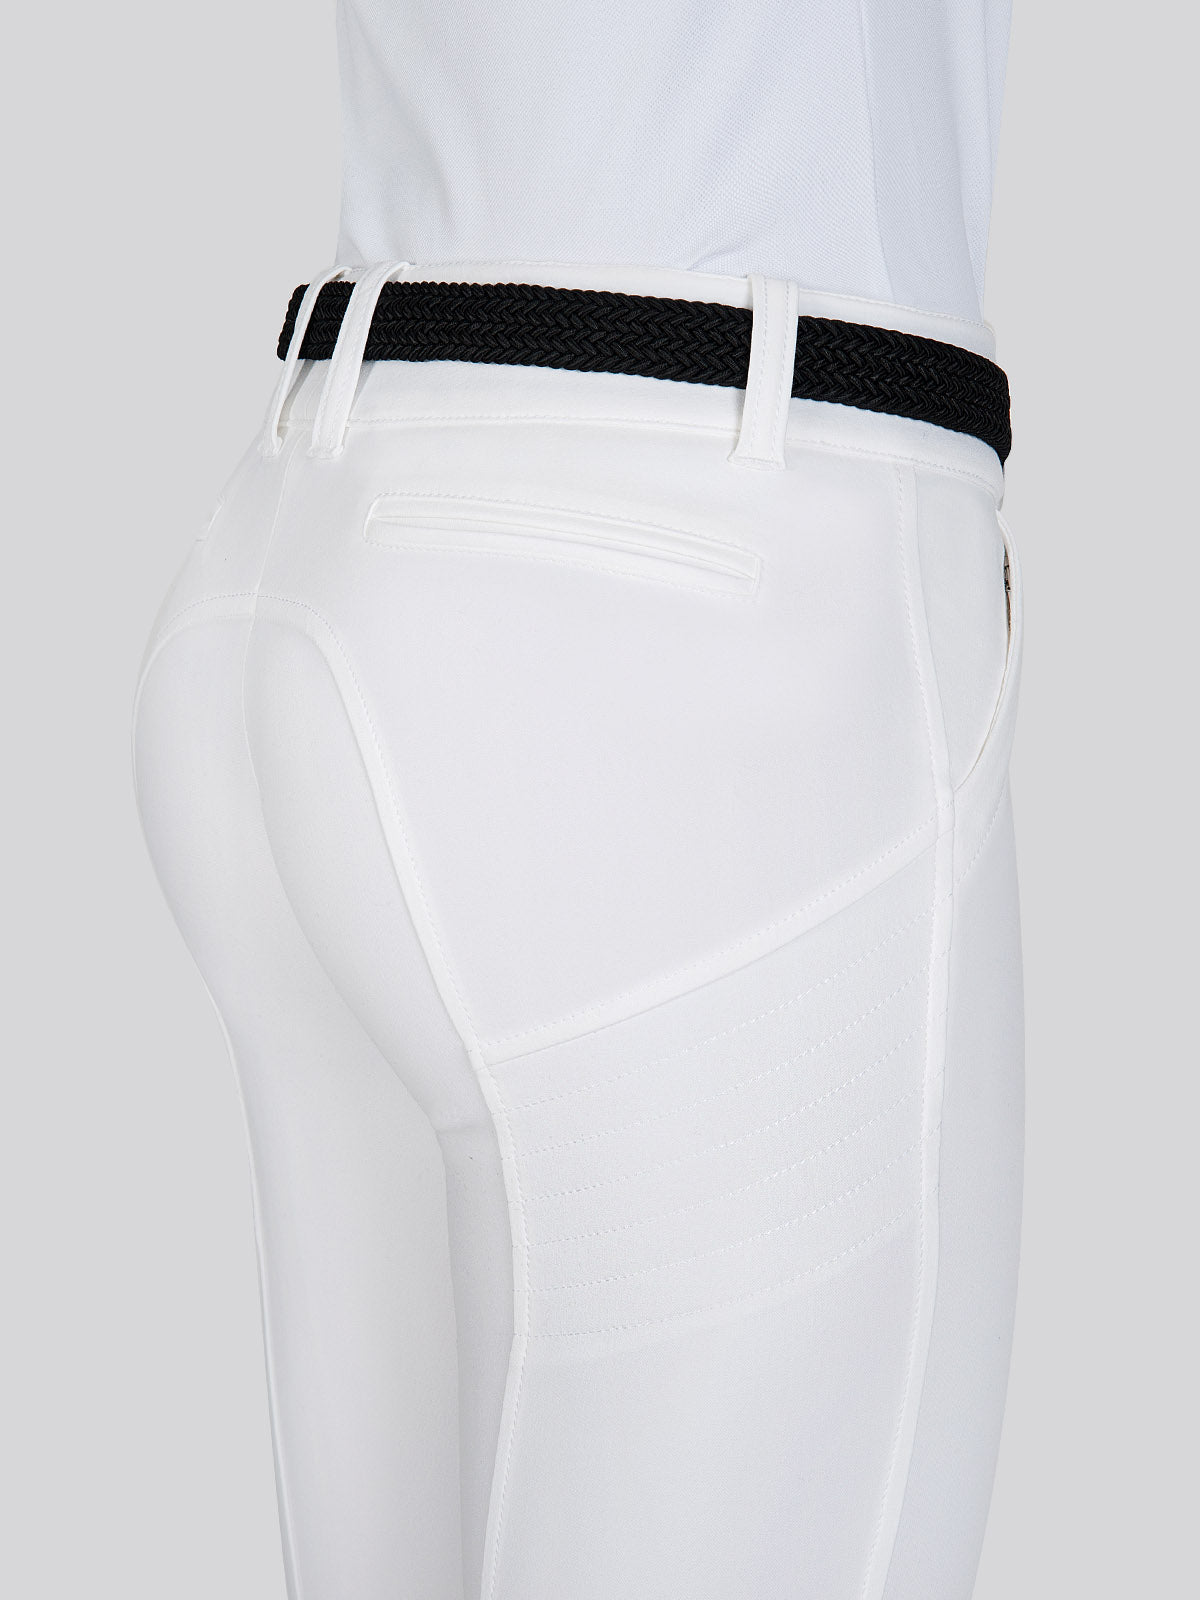 The innovative Equiline X Shape breech has inner and outer special inserts created to support the body and the balance while riding. They have a comfort waist with push up Equiline patented fabric made from microfibre combined with an ultra ergonomic tailoring and knee grip system these will be those breeches you can’t live without!  